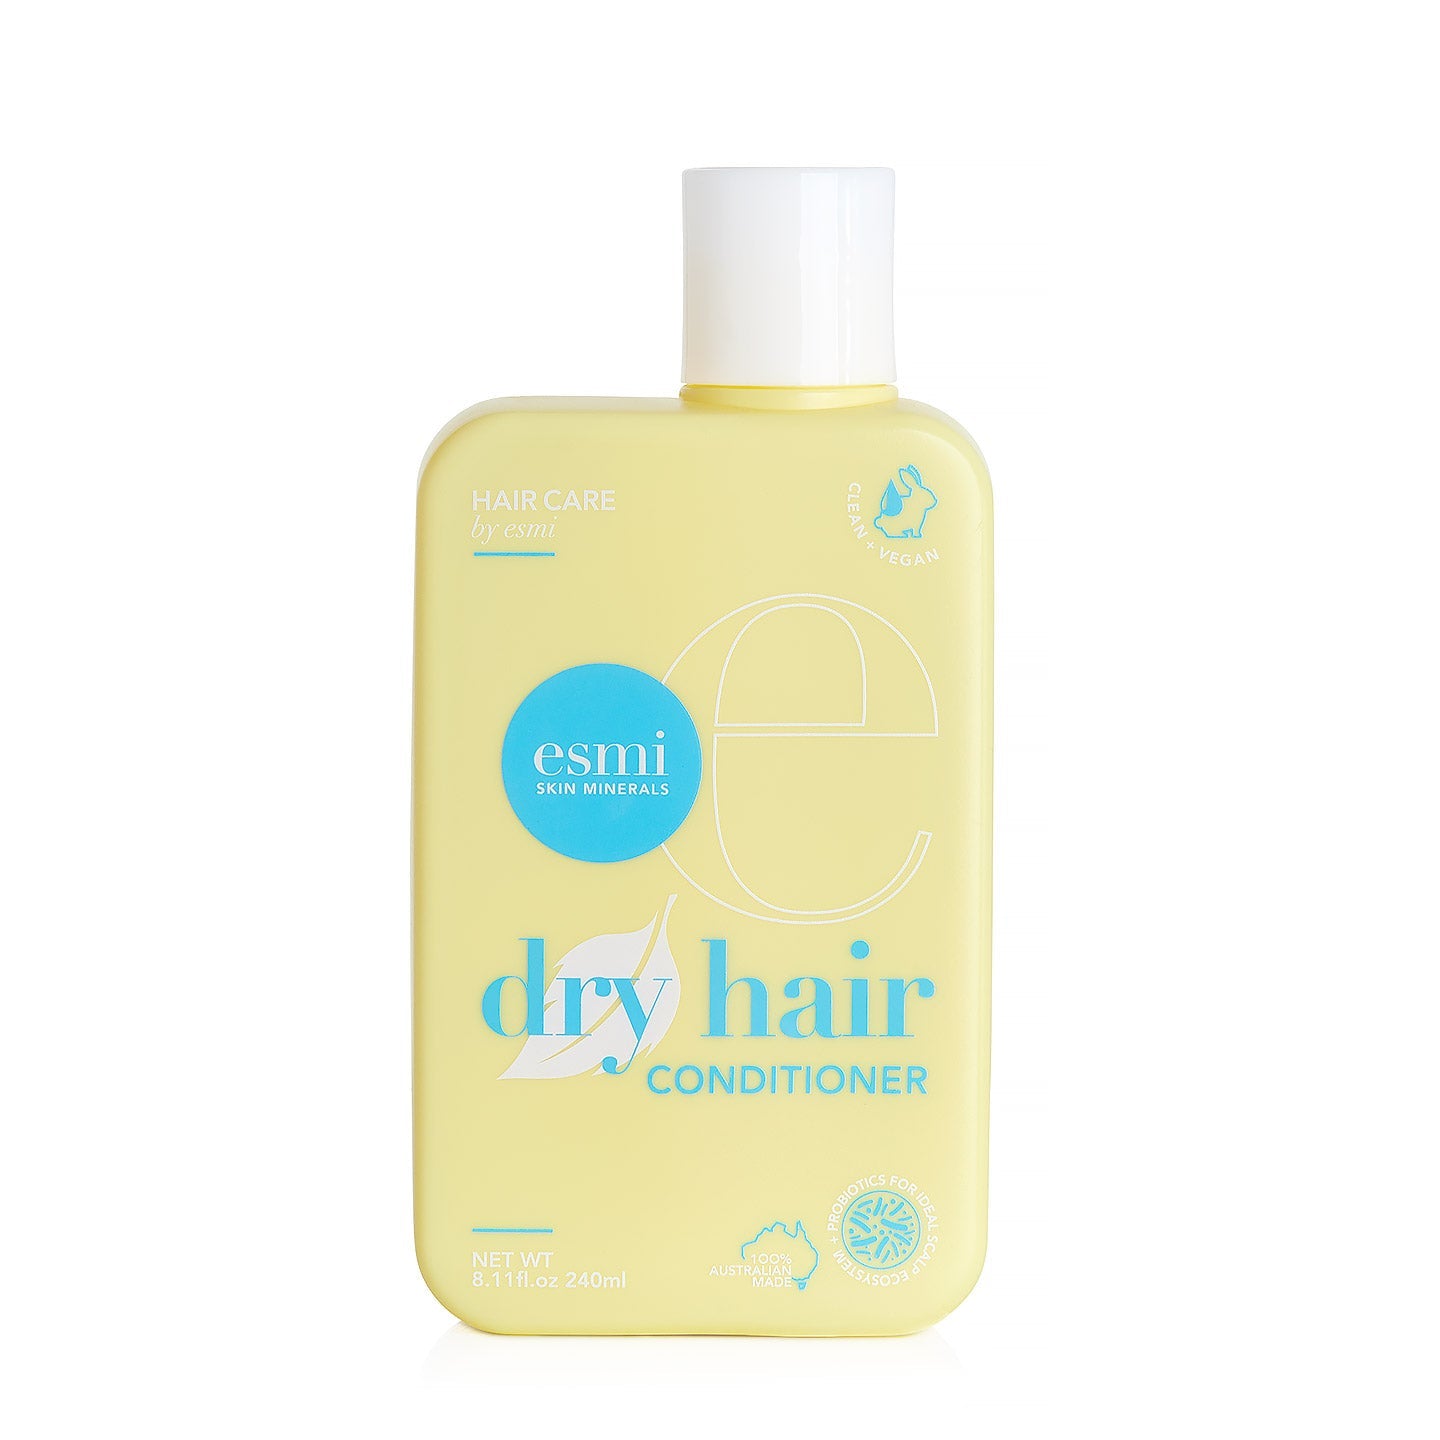 Dry Hair Conditioner 240ml